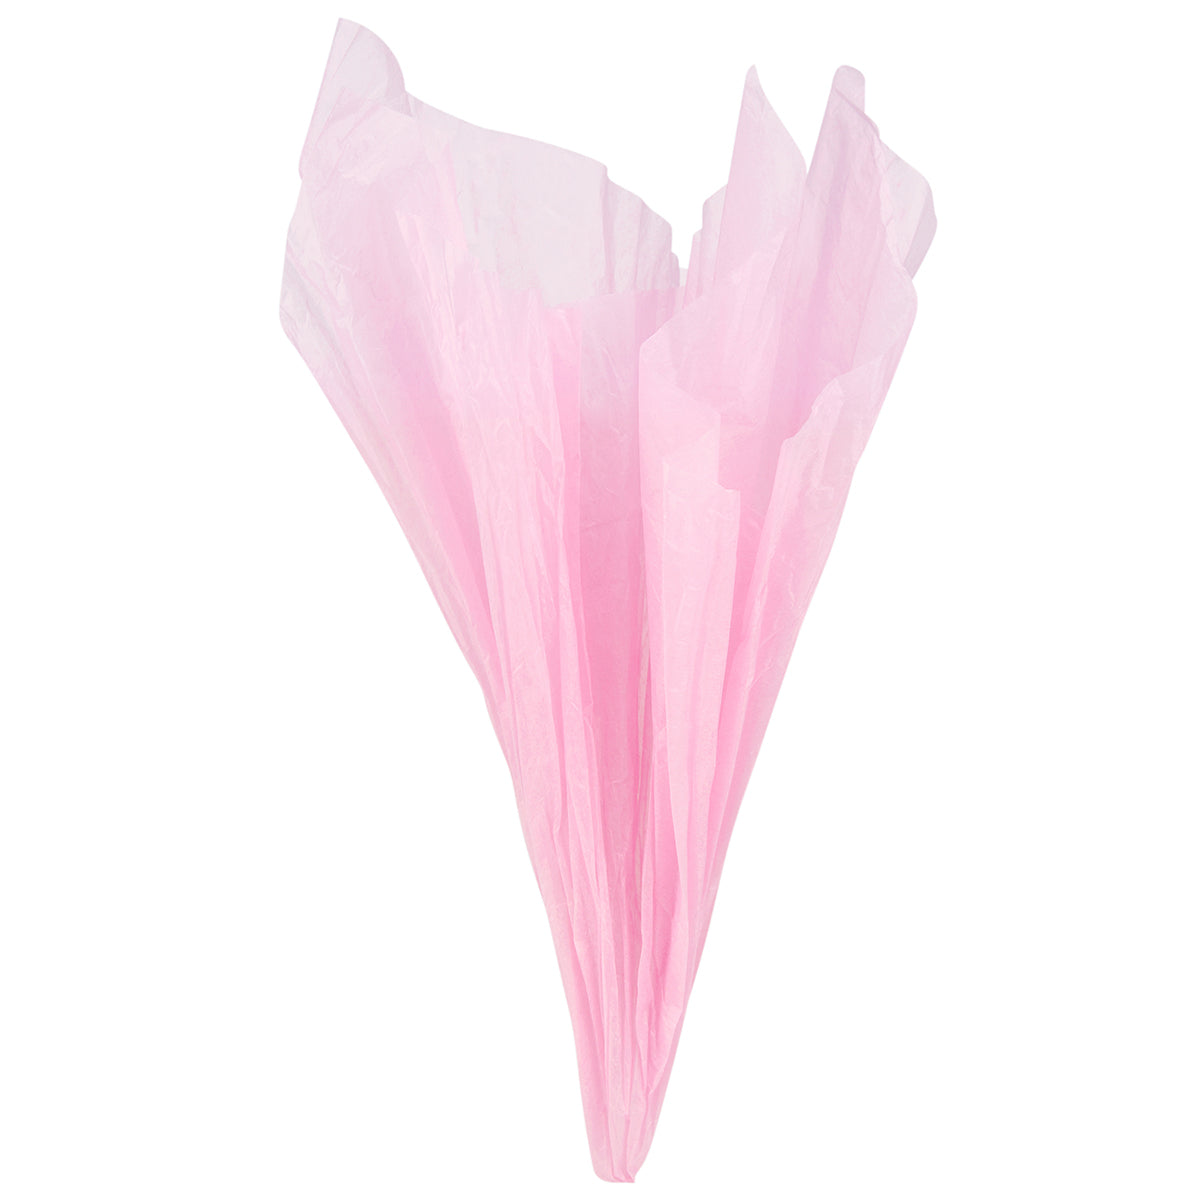 Displaying of a pink tissue paper in ice cream cone shape